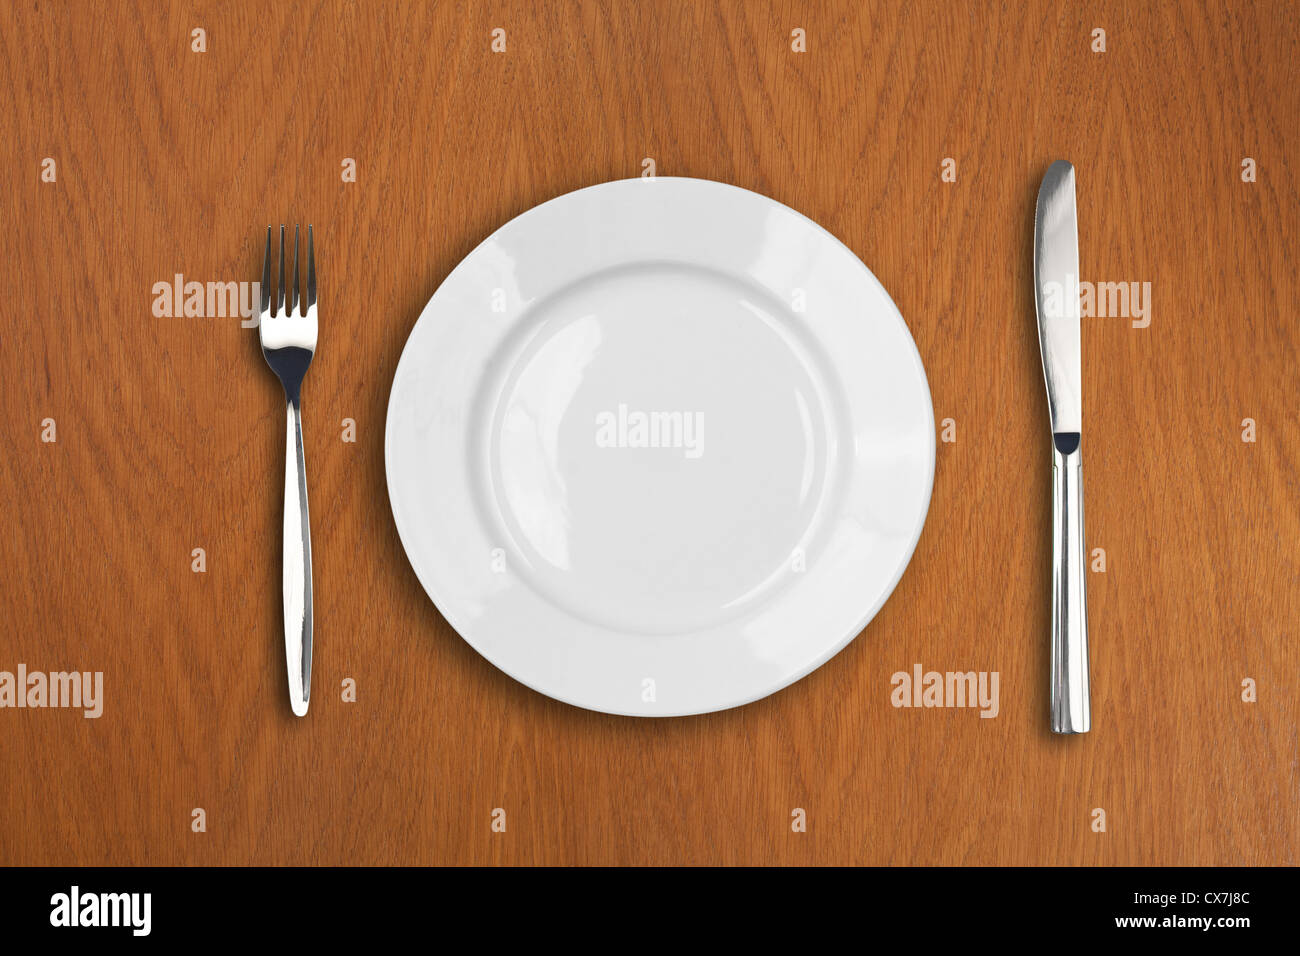 round white plate, knife and fork on wooden table Stock Photo